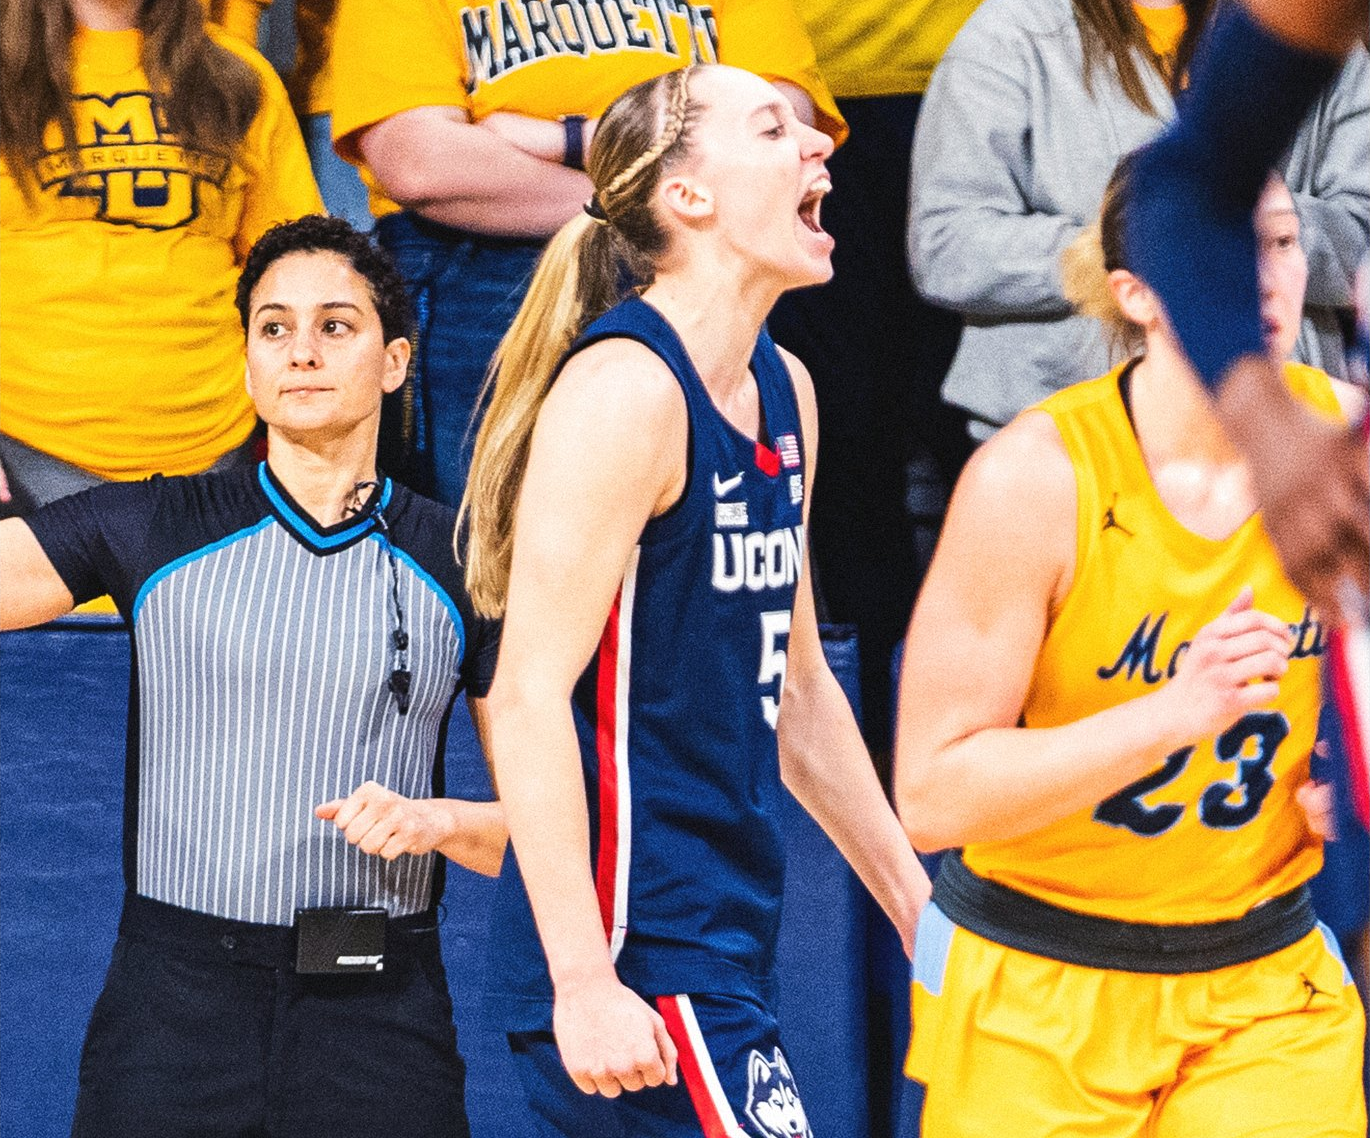 Minnesota native Paige Bueckers scores 28, as No. 8 UConn rips Marquette